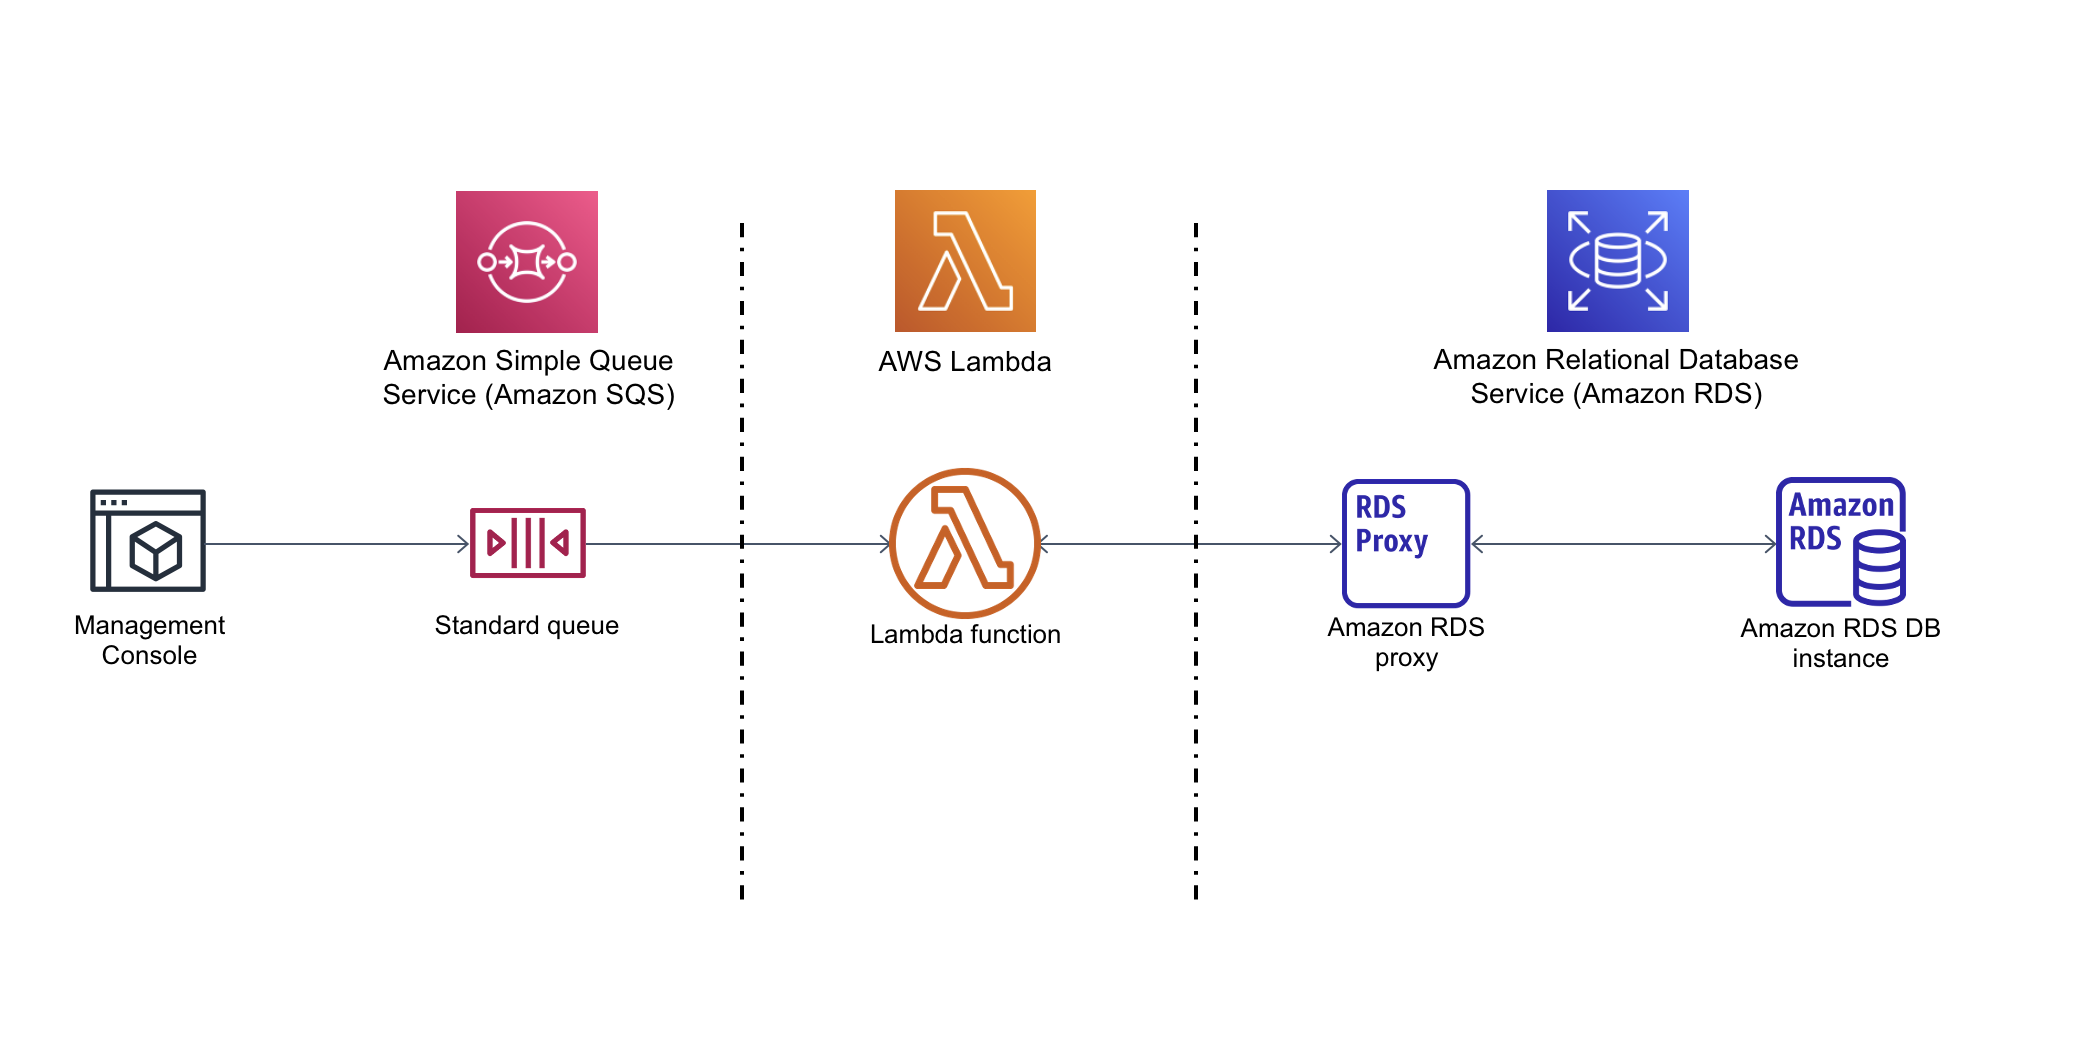 
      An instance of the Amazon Web Services Management Console connects to an Amazon SQS standard queue, which connects to a
        Lambda function, which further connects to a RDS for MySQL database through RDS Proxy.
    